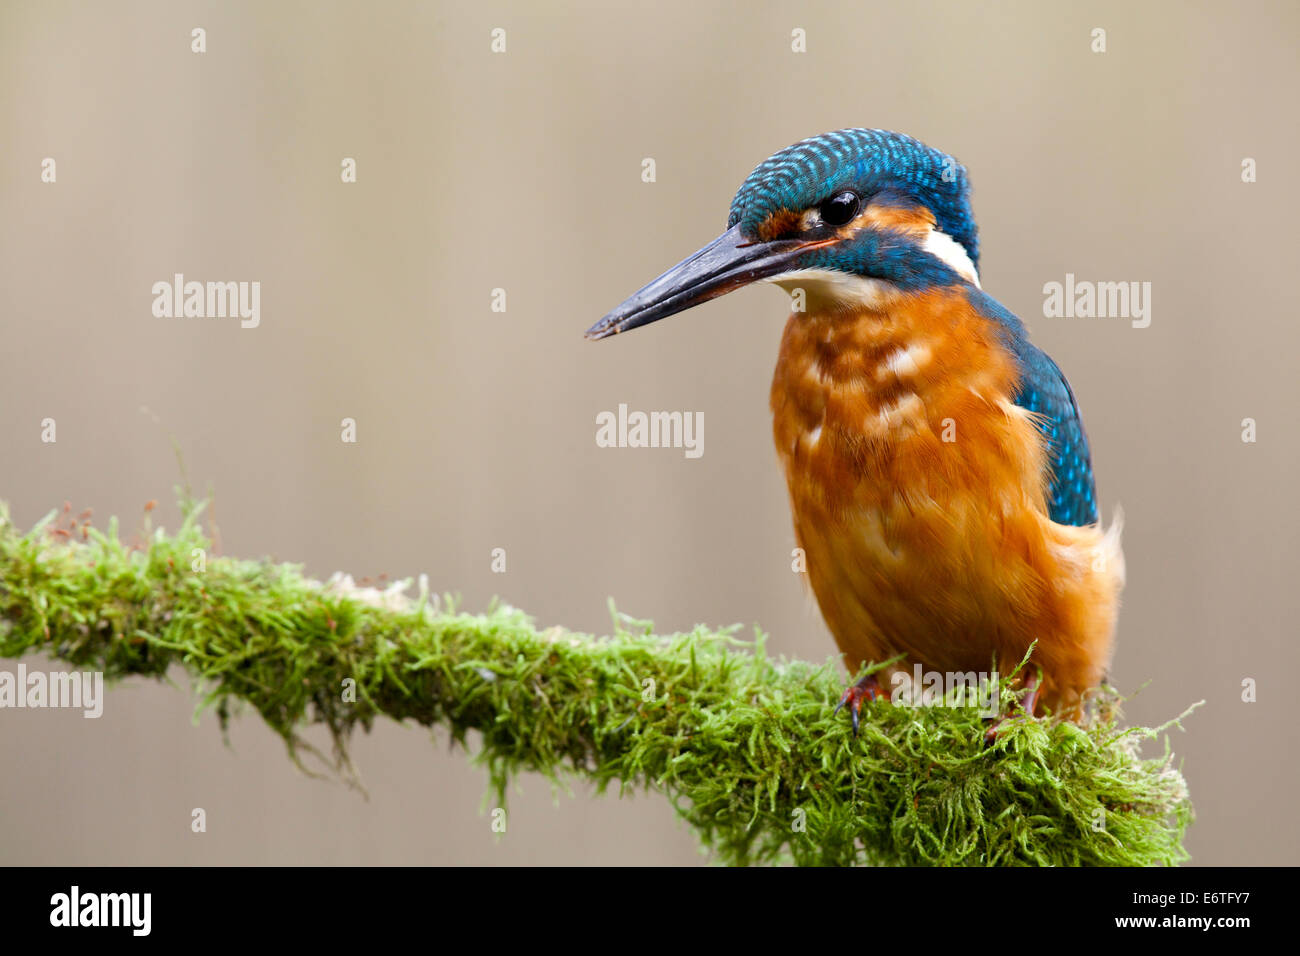 Kingfisher keeps a beady eye on the shallow stream while perched on the moss covered tree branch #2957 Stock Photo